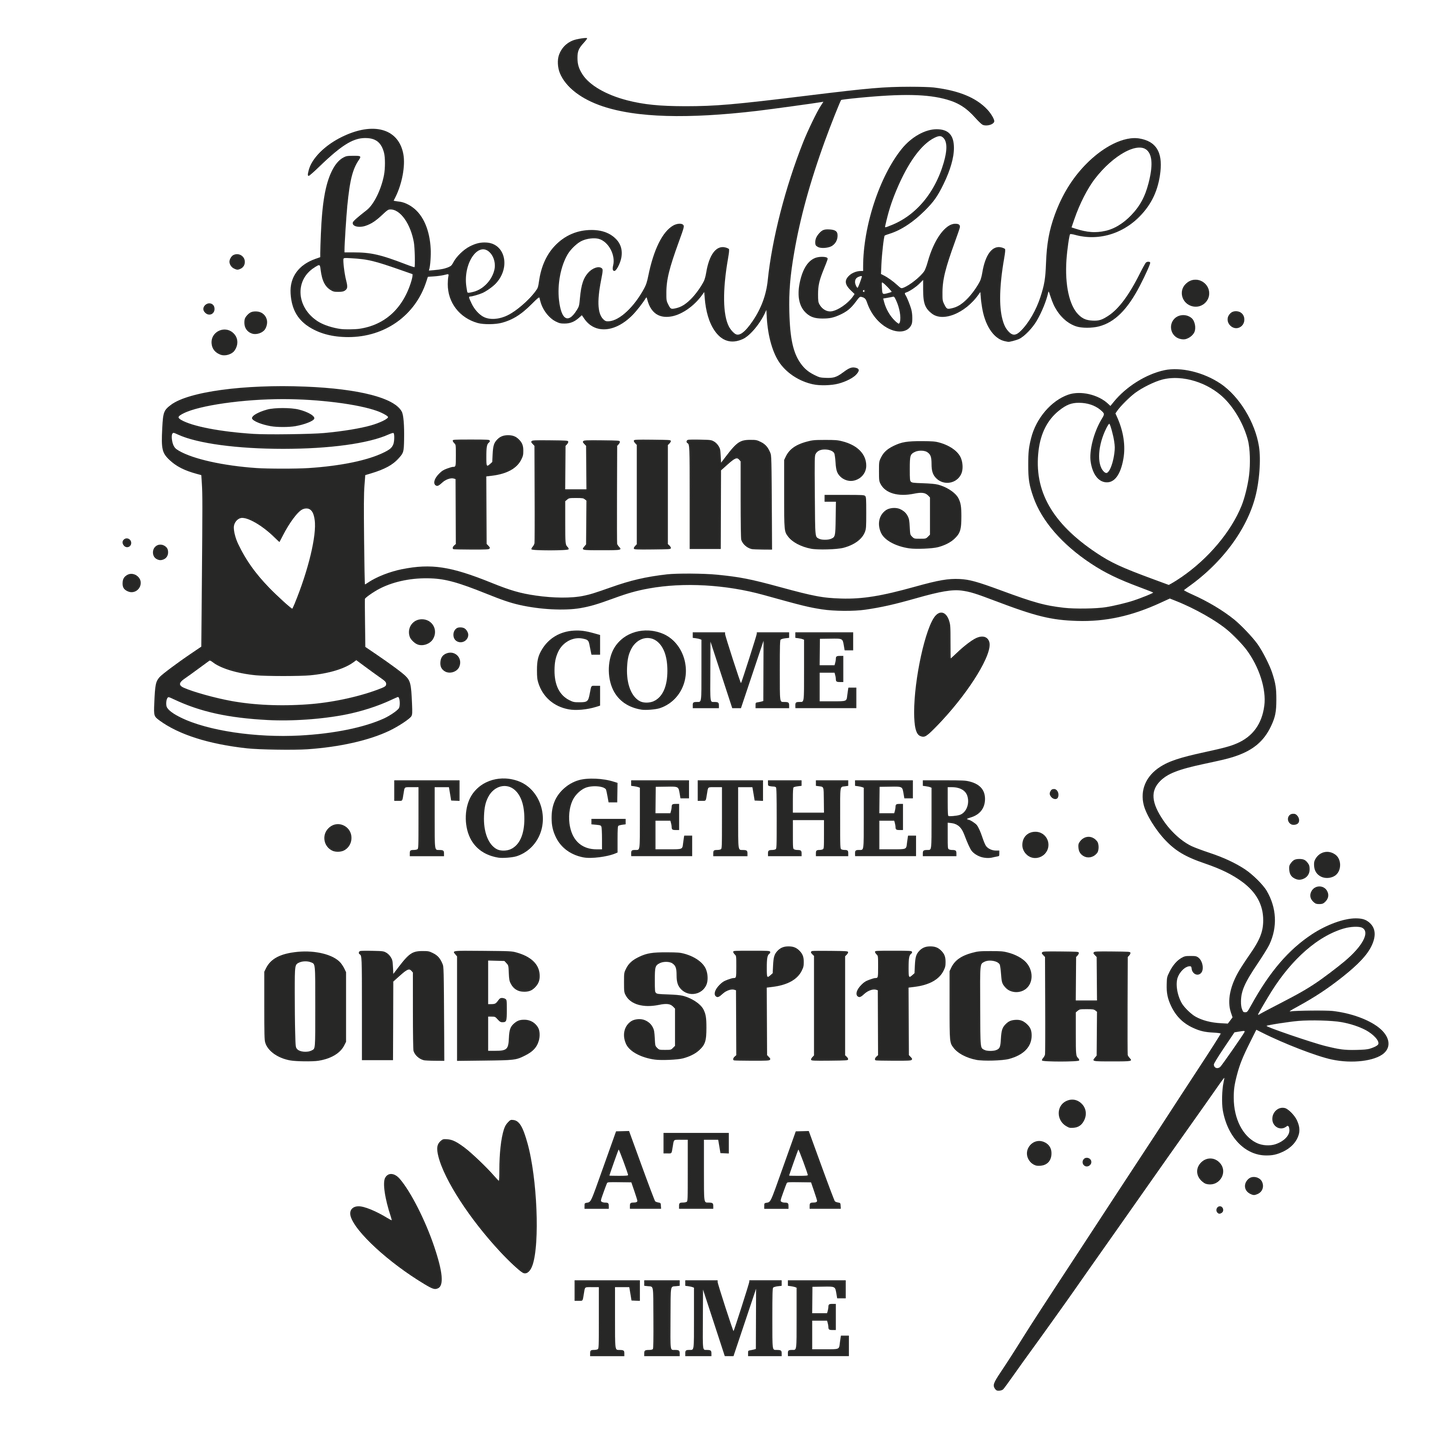 Wall Art - Beautiful Things Come Together One Stitch at a Time - 8x10 Canvas